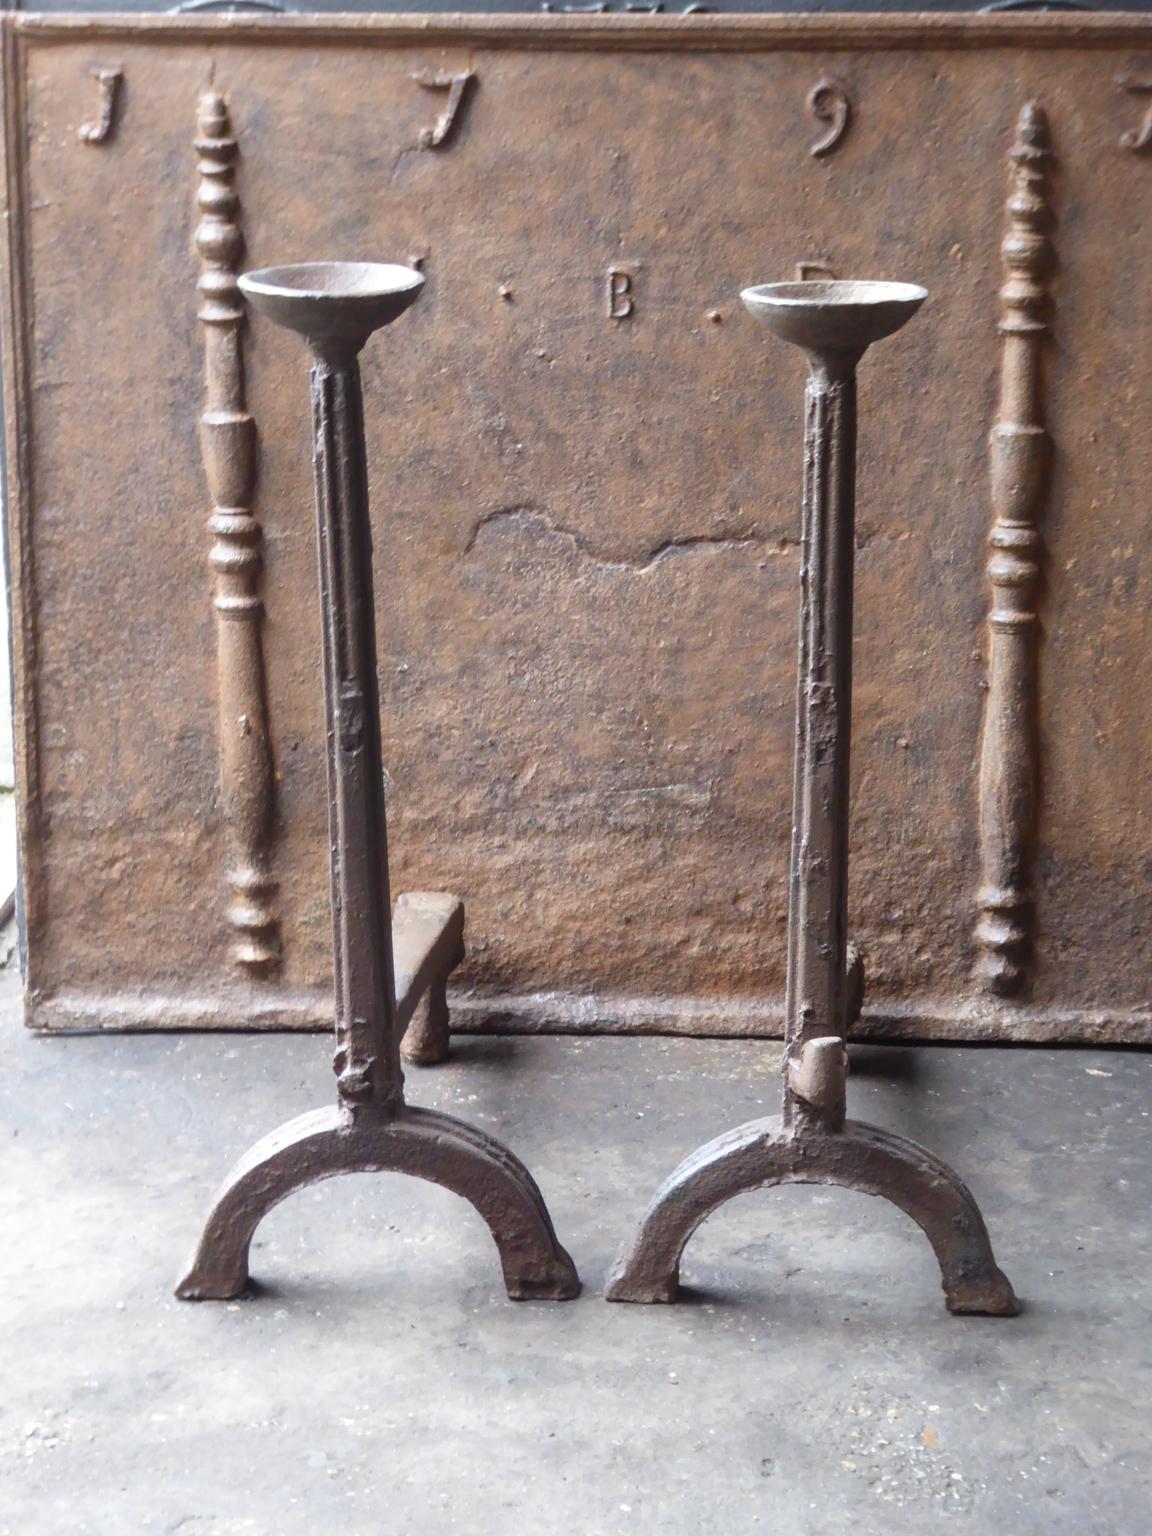 Impressive 16th-17th century French Gothic andirons made of cast iron. The andirons have spit hooks to grill food and cups to keep drinks warm. The andirons are therefore also called cup dogs.

This product has to be shipped as freight due to its